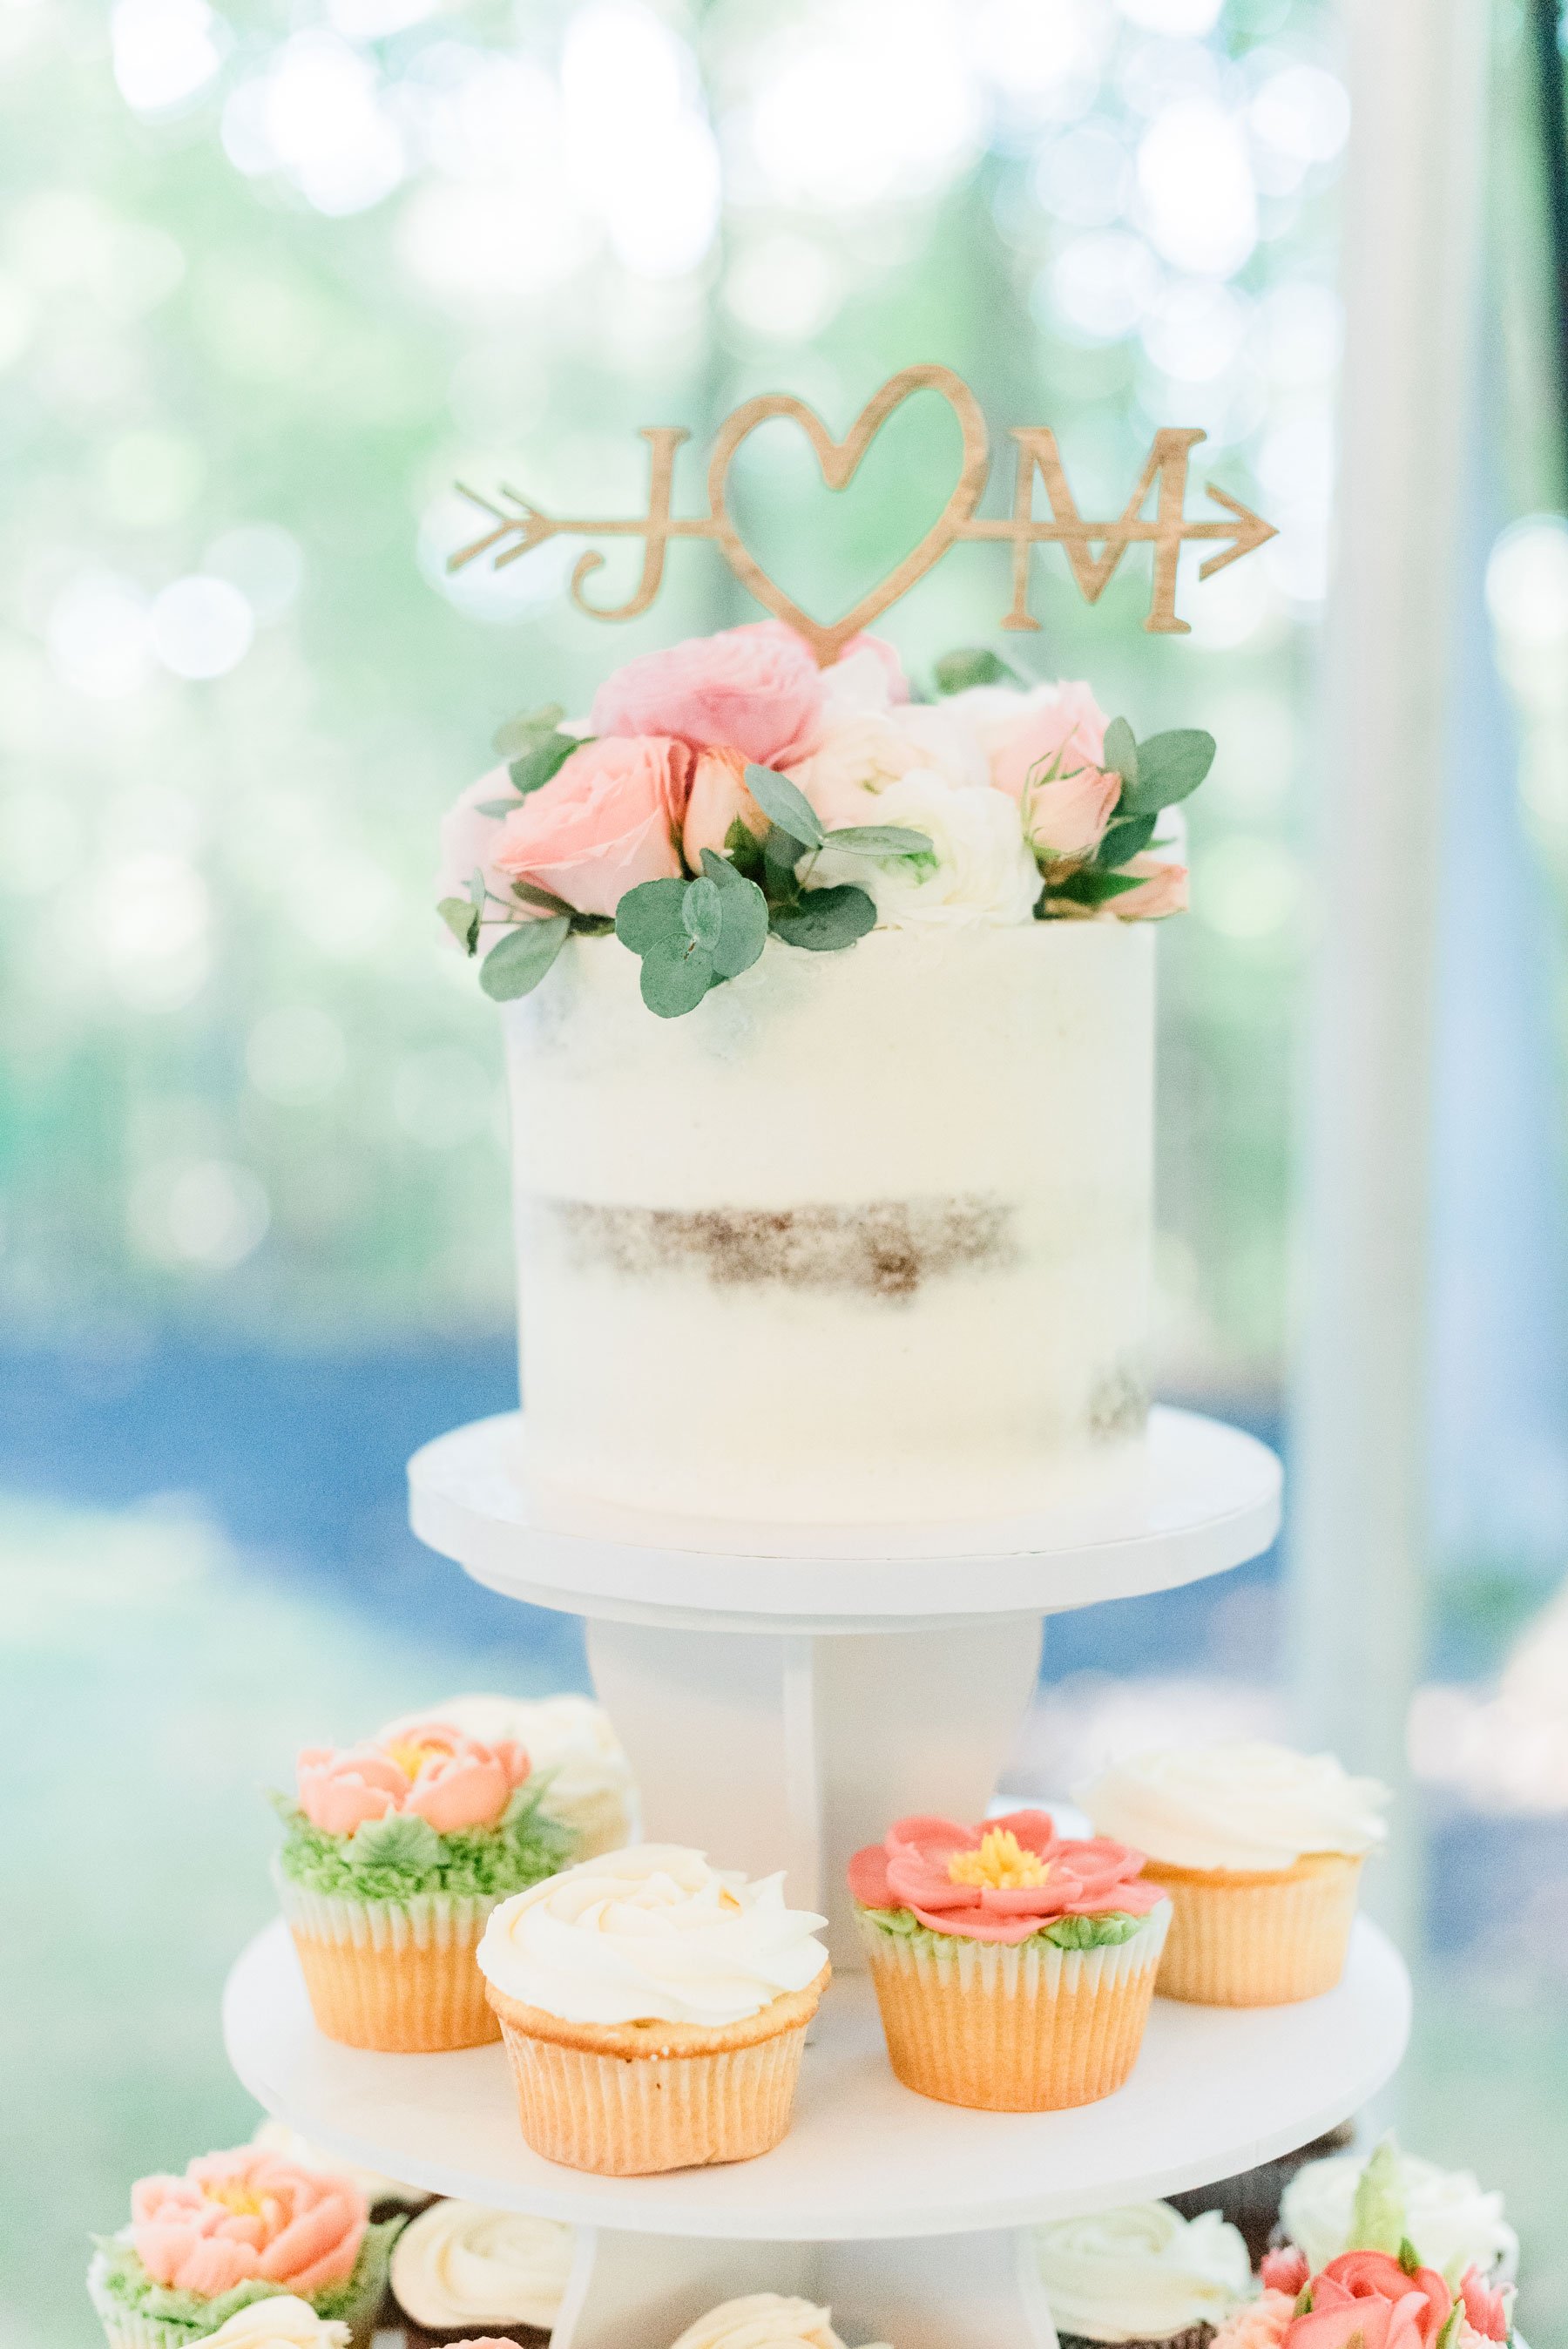    I loved this wedding cake concept made up of colorful floral cupcakes on a stand. #washingtondctemple #washingtondcweddingphotographer #dcwedding #pinkwedding #ldsweddingphotographer #pinkweddingbouquet #washingtondctempleexit #eastcoastweddingpho